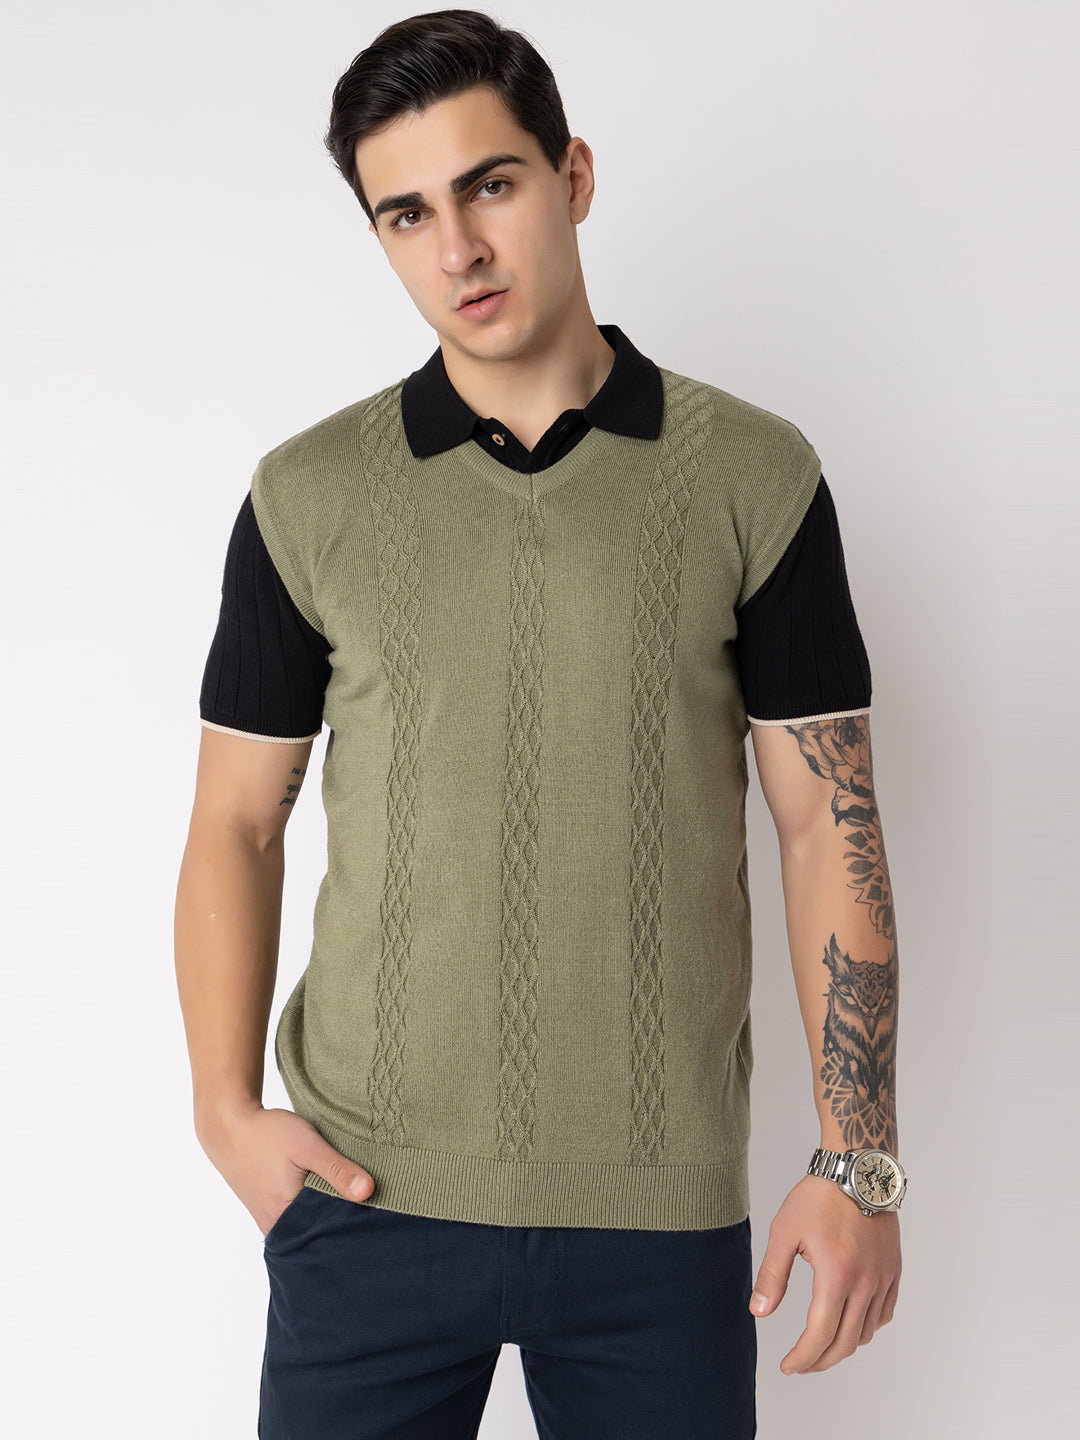 238 Cable Pullover I Wool I Woolmark Certified I Olive